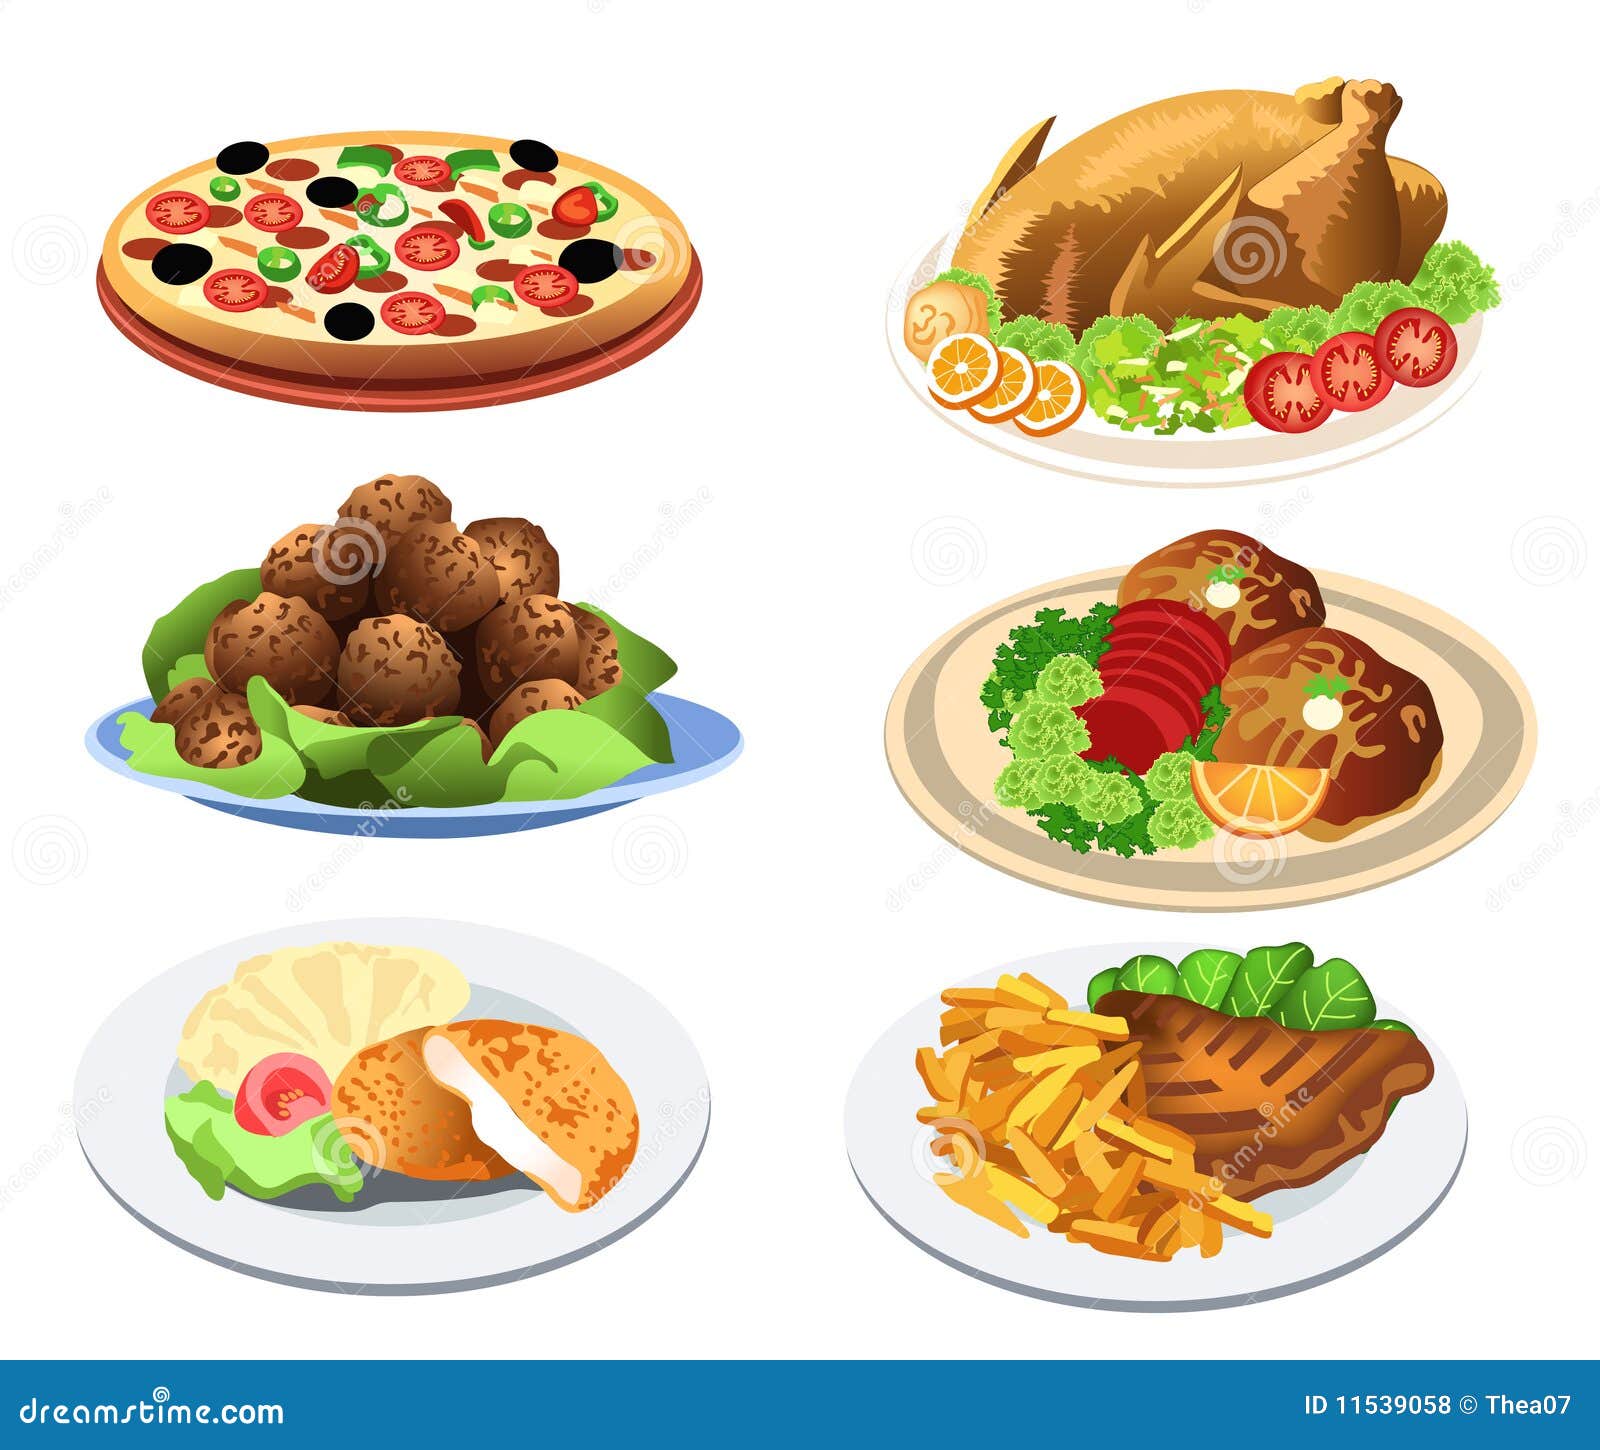 clipart images dishes - photo #37